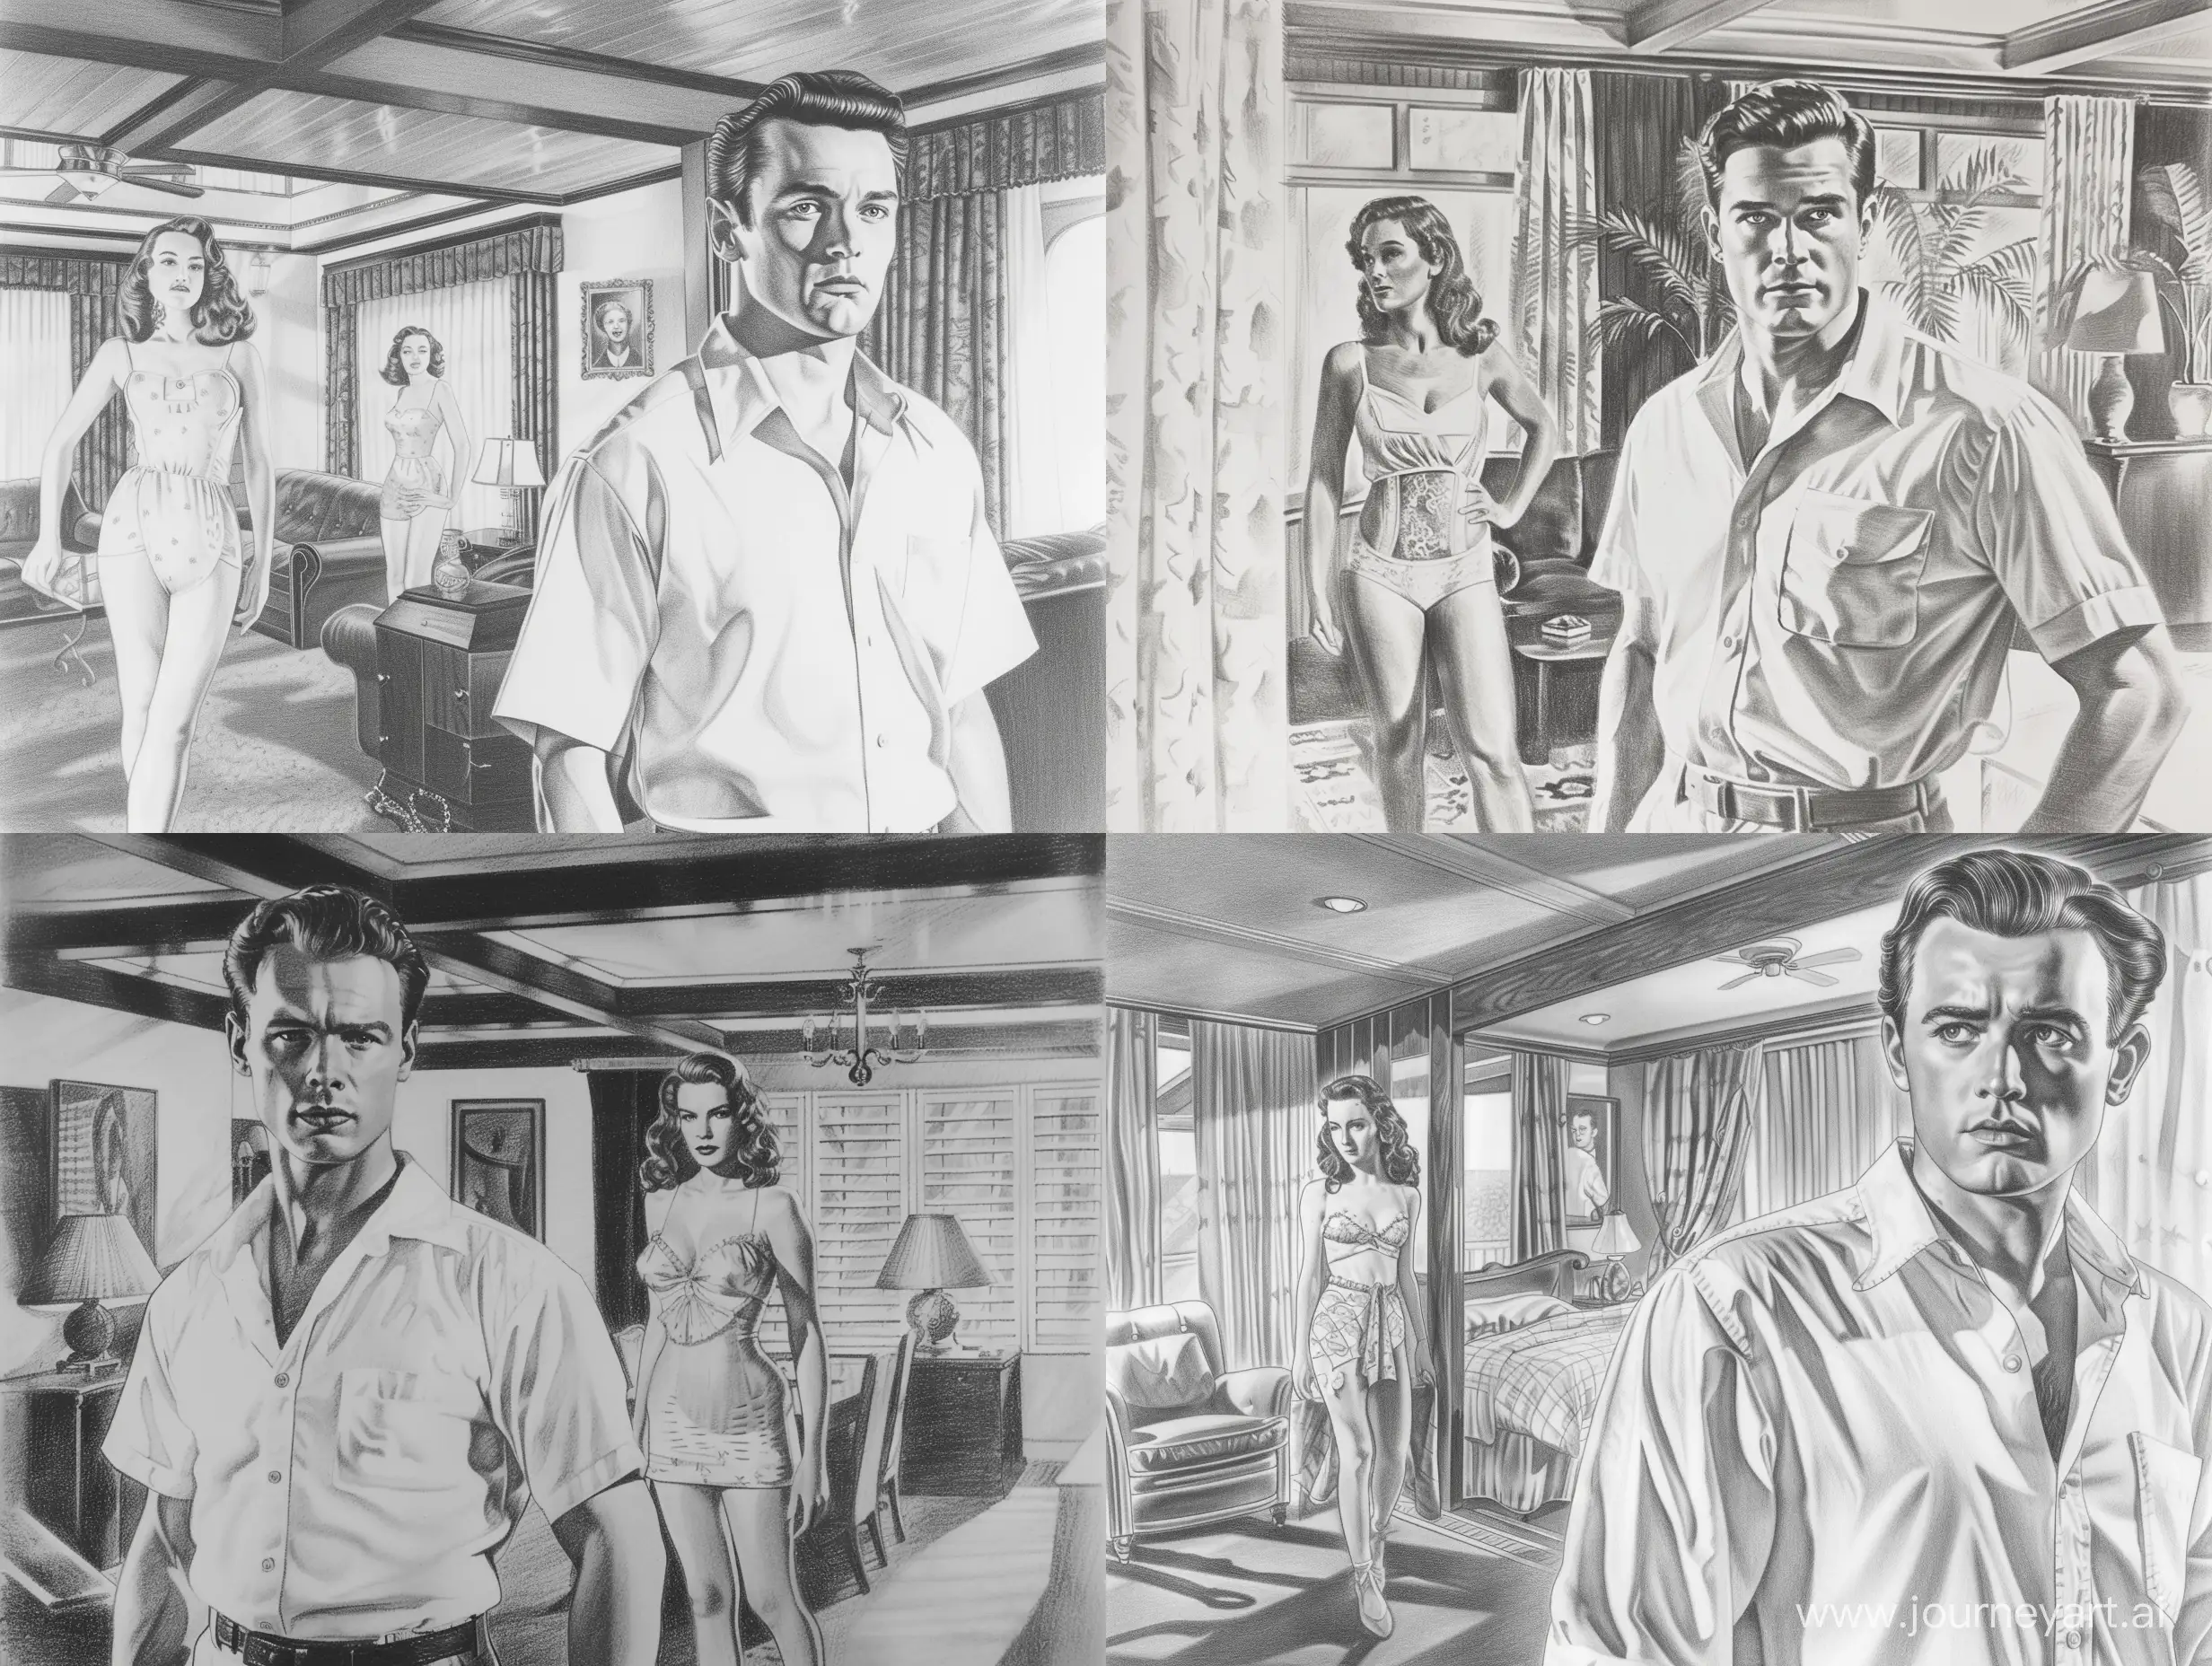 Loose Pencil drawing of a vintage 1940s handsome movie star man wearing a white shirt
standing in the foreground inside a 1940s glamorous apartment interior, with a pretty 1940s female fatale woman wearing vintage 1940s lingerie standing in the background 